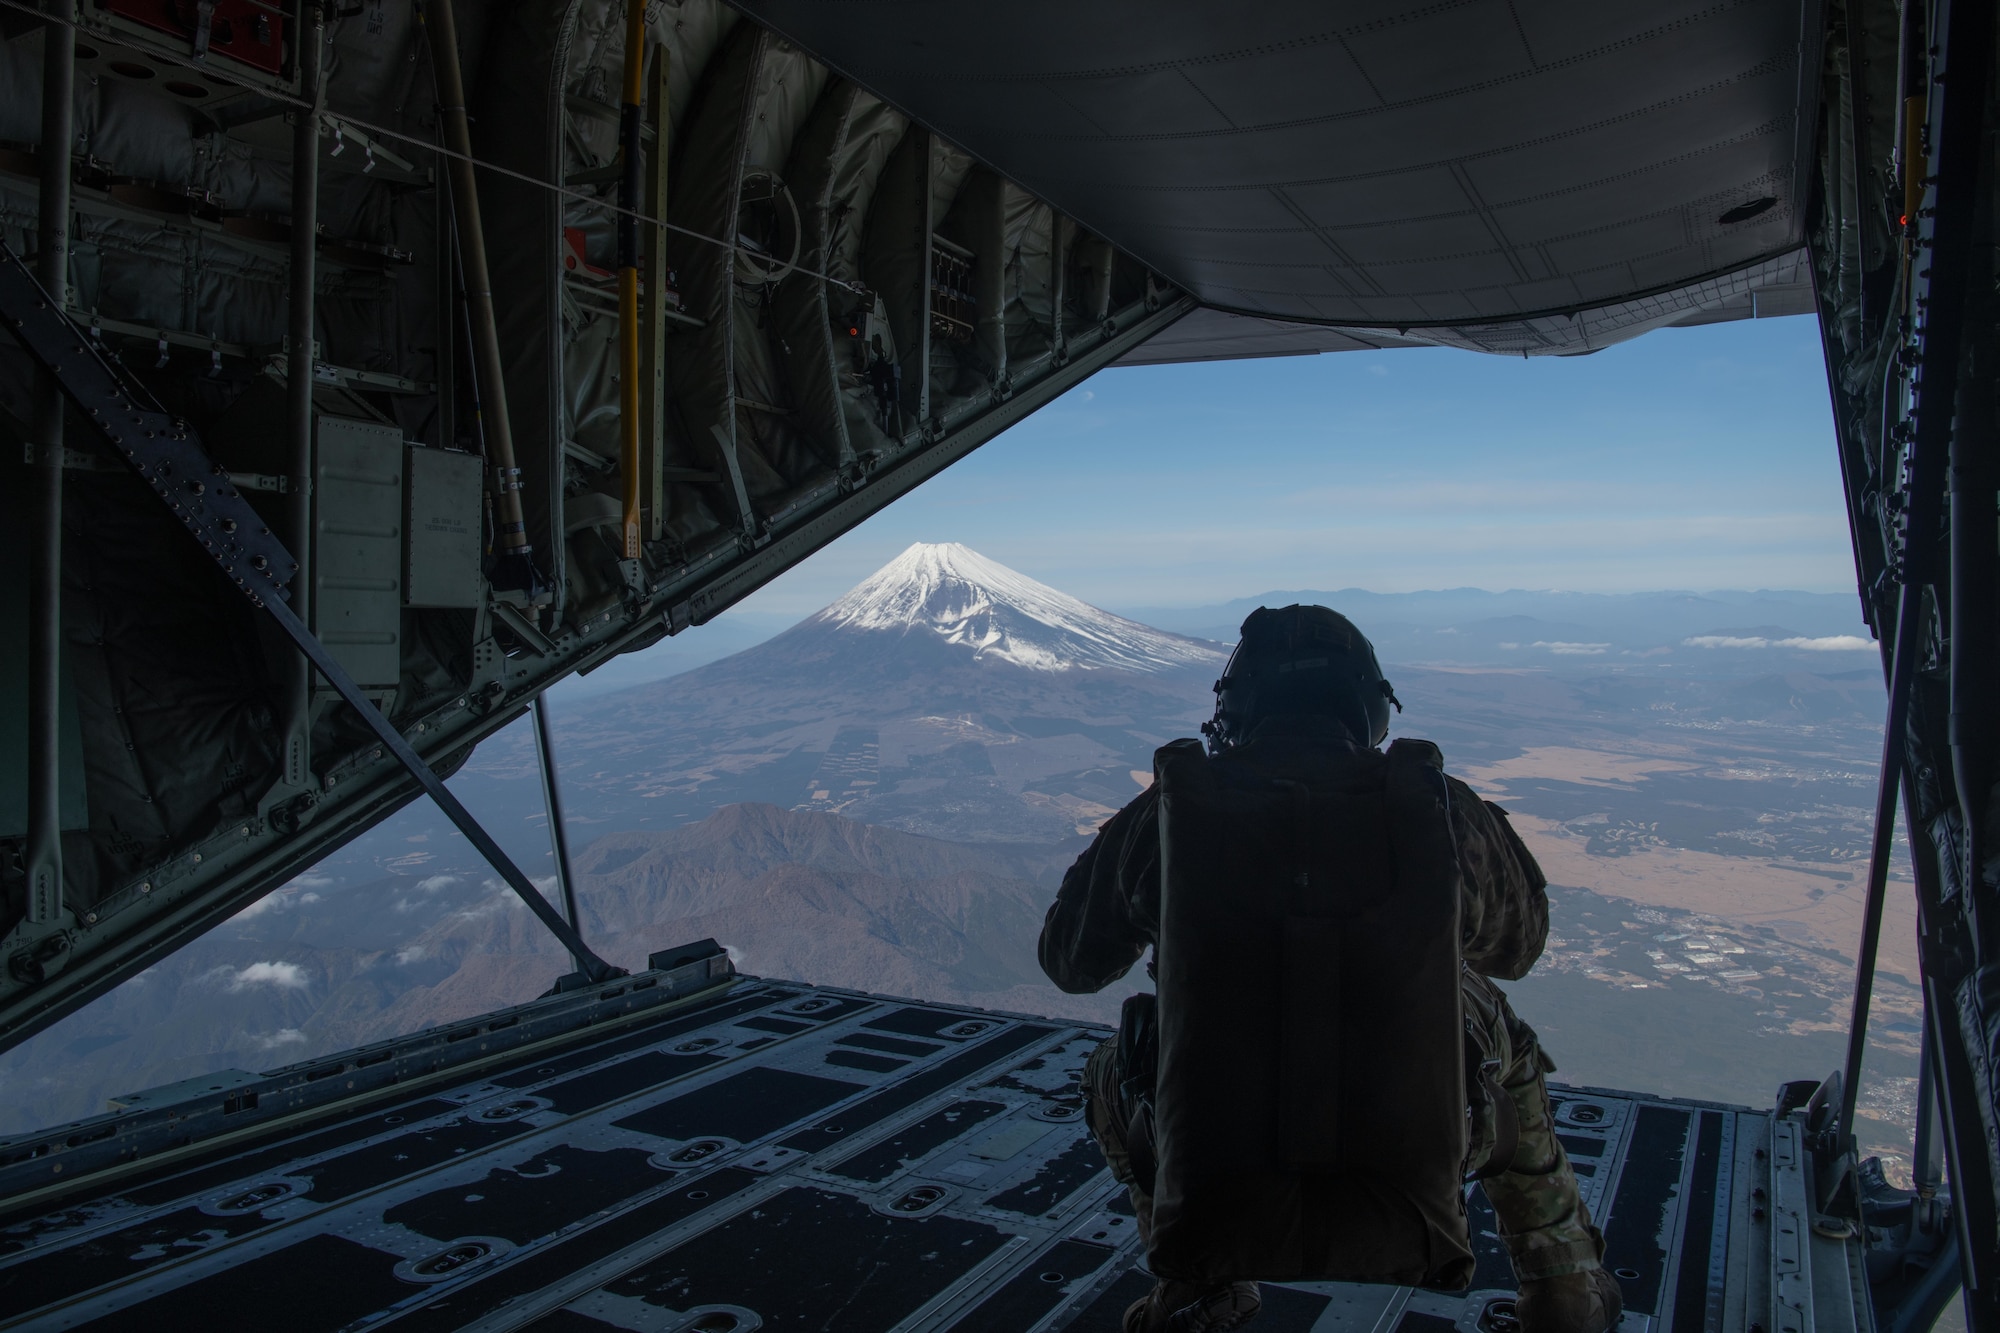 U.S. Air Force Staff. Sgt. Jordan Silversmith, 36th Airlift Squadron instructor loadmaster, surveys the land in support of a high altitude, low opening (HALO) parachute jumps at Yokota Air Base, Japan, Dec. 17, 2021